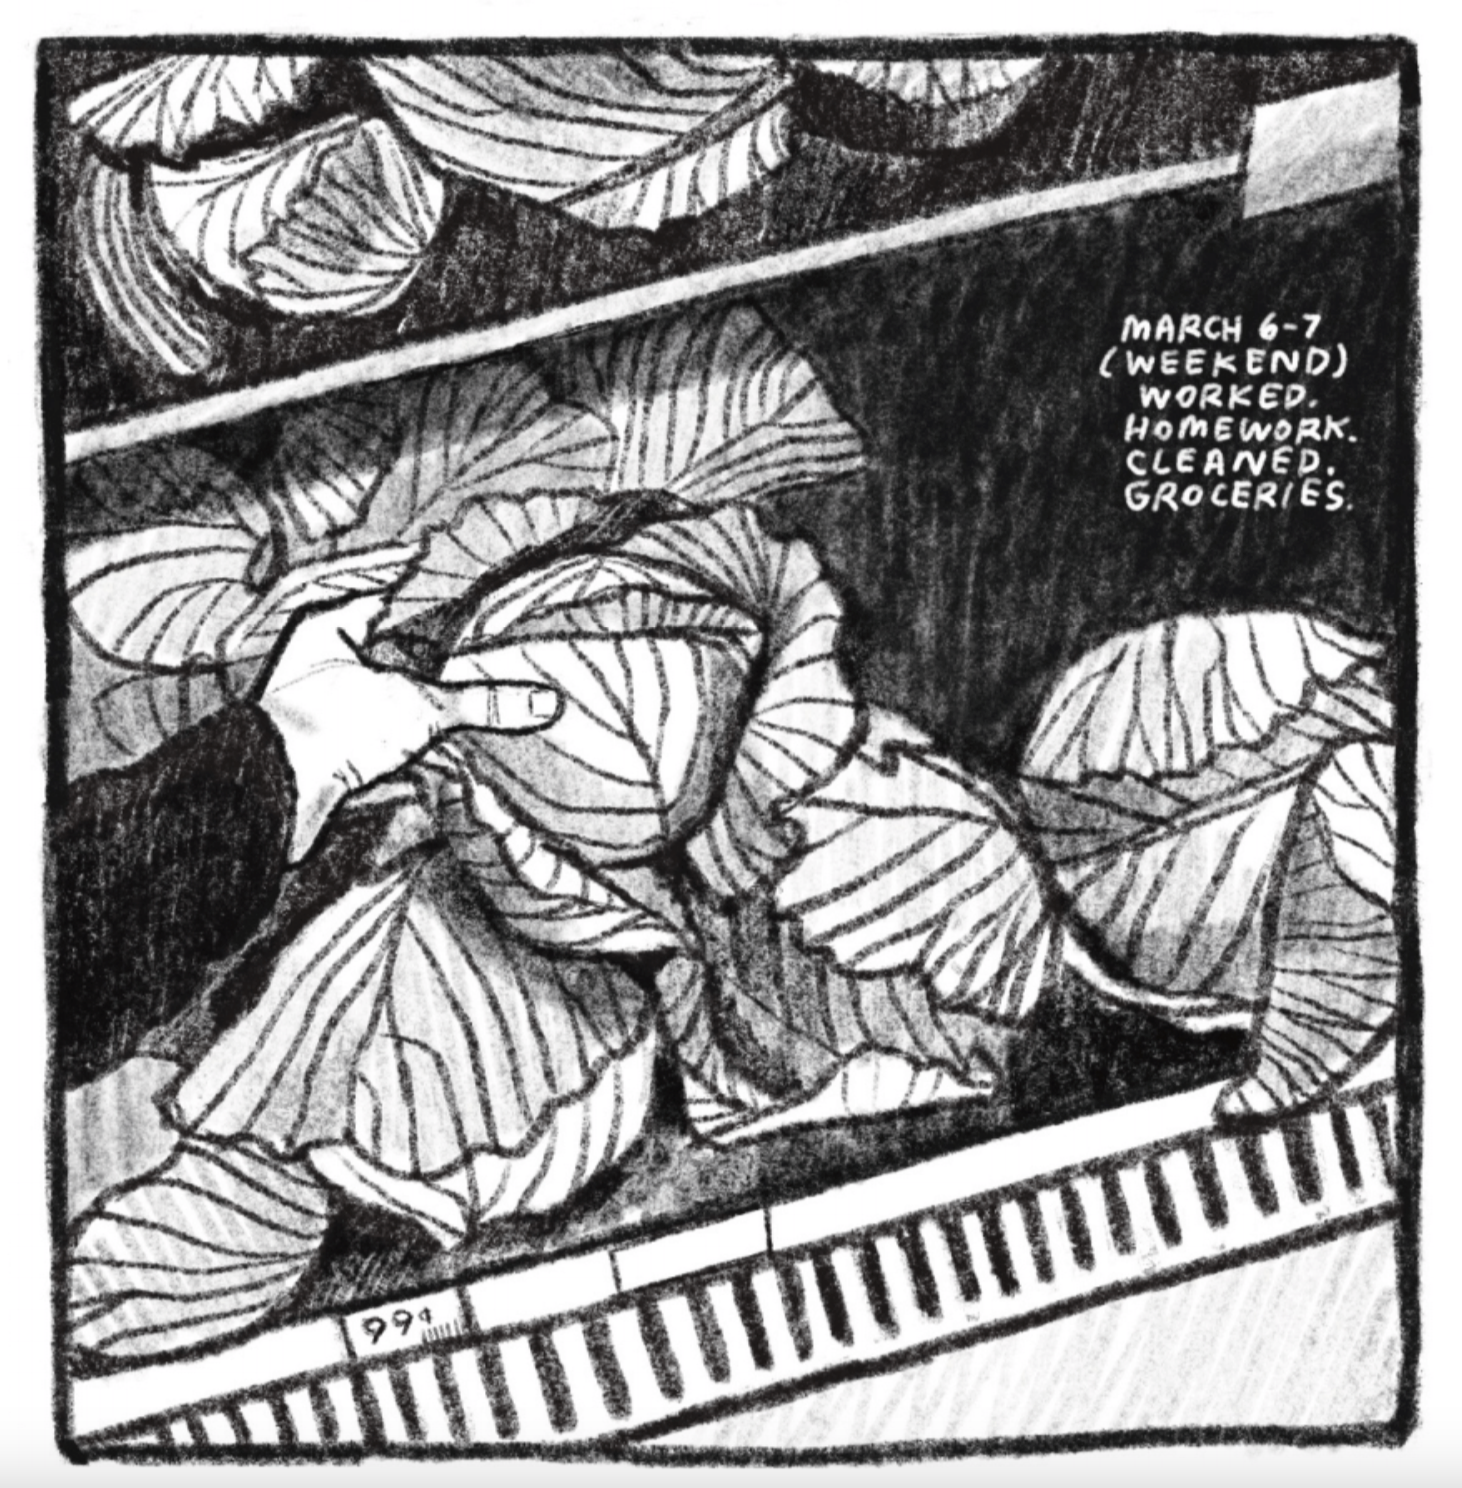 Panel 6
A hand reaches for a head of cabbage in a grocery store shelf/well. A small sign prices them at 99 cents.
Description reads: "MARCH 6-7 (WEEKEND) WORKED. HOMEWORK. CLEANED. GROCERIES."